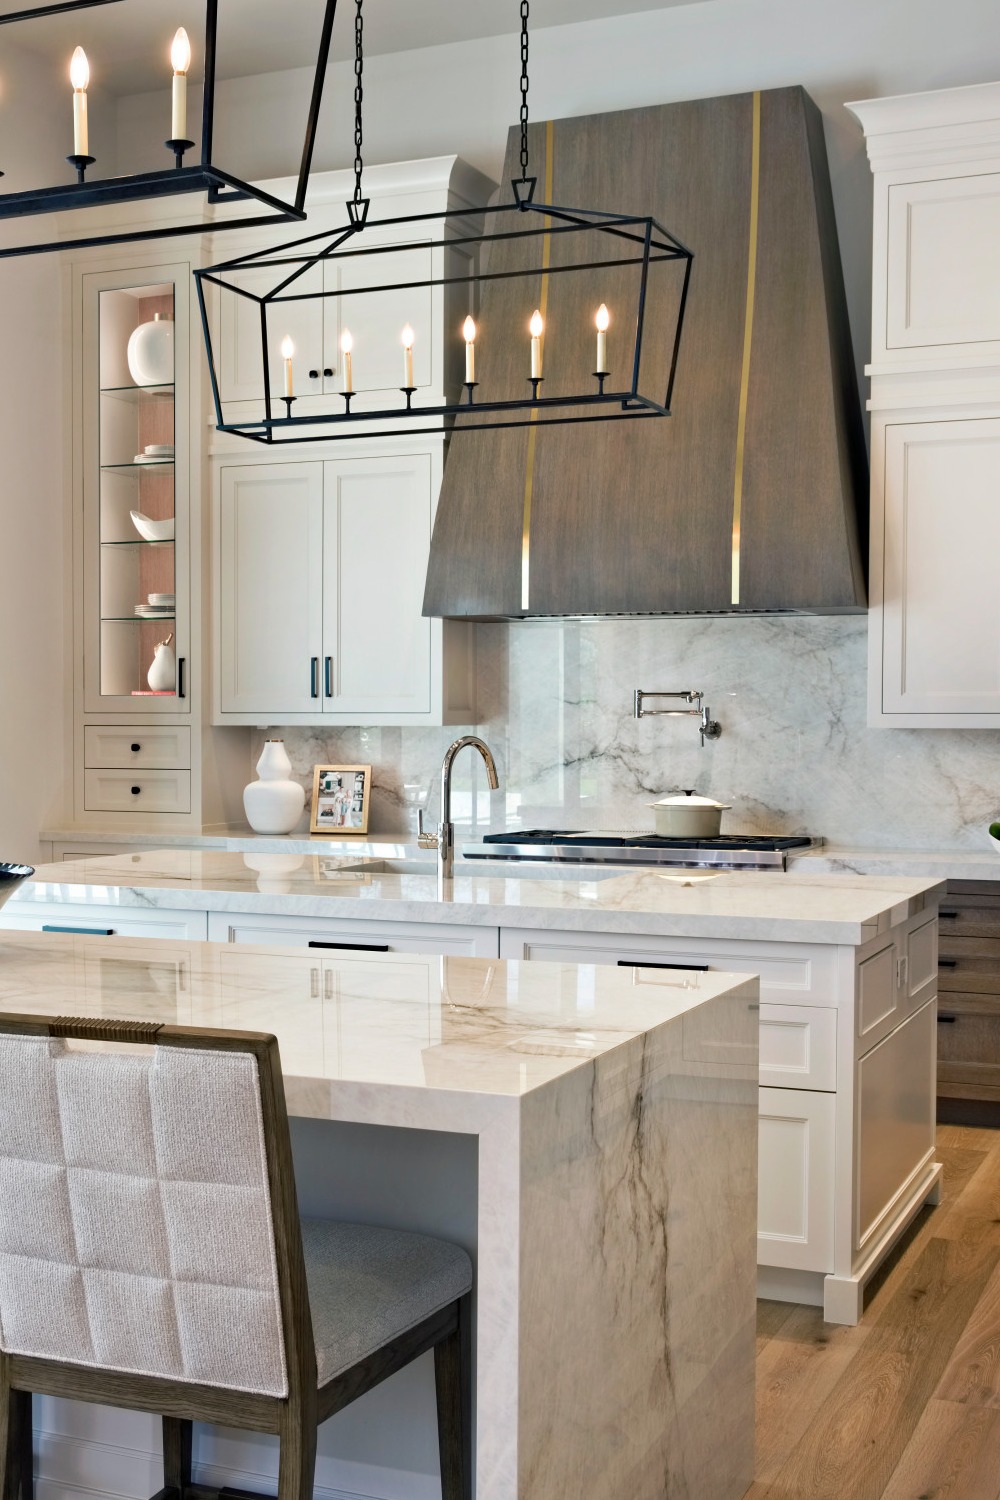 Next Kitchen Renovation Cabinetry Statement Piece Traditional Kitchen Design Tip Cooking Odors